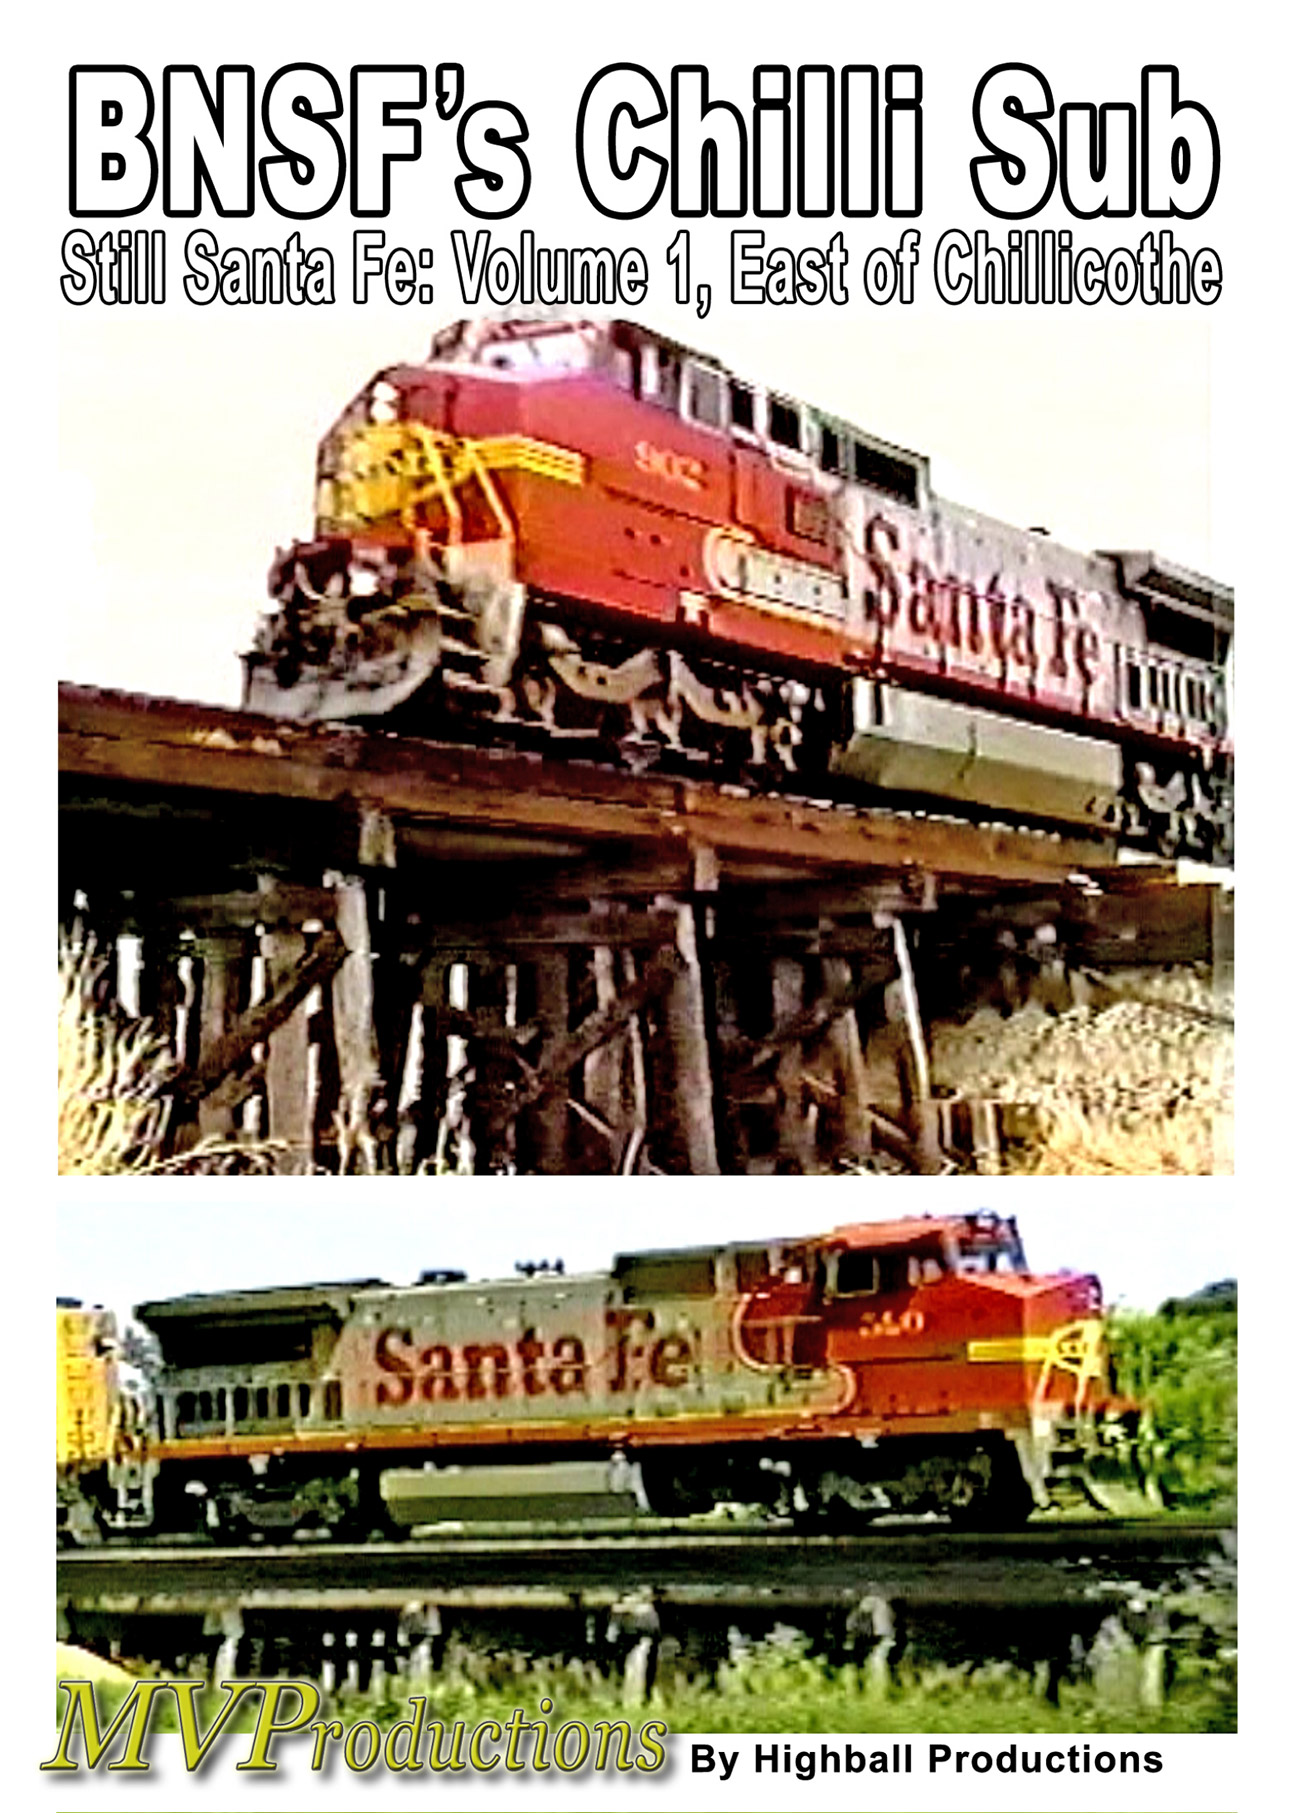 BNSF Chillicothe Sub: Still Santa Fe Volume 1, East of Chillicothe Midwest Video Productions MVCHIL1 601577880127